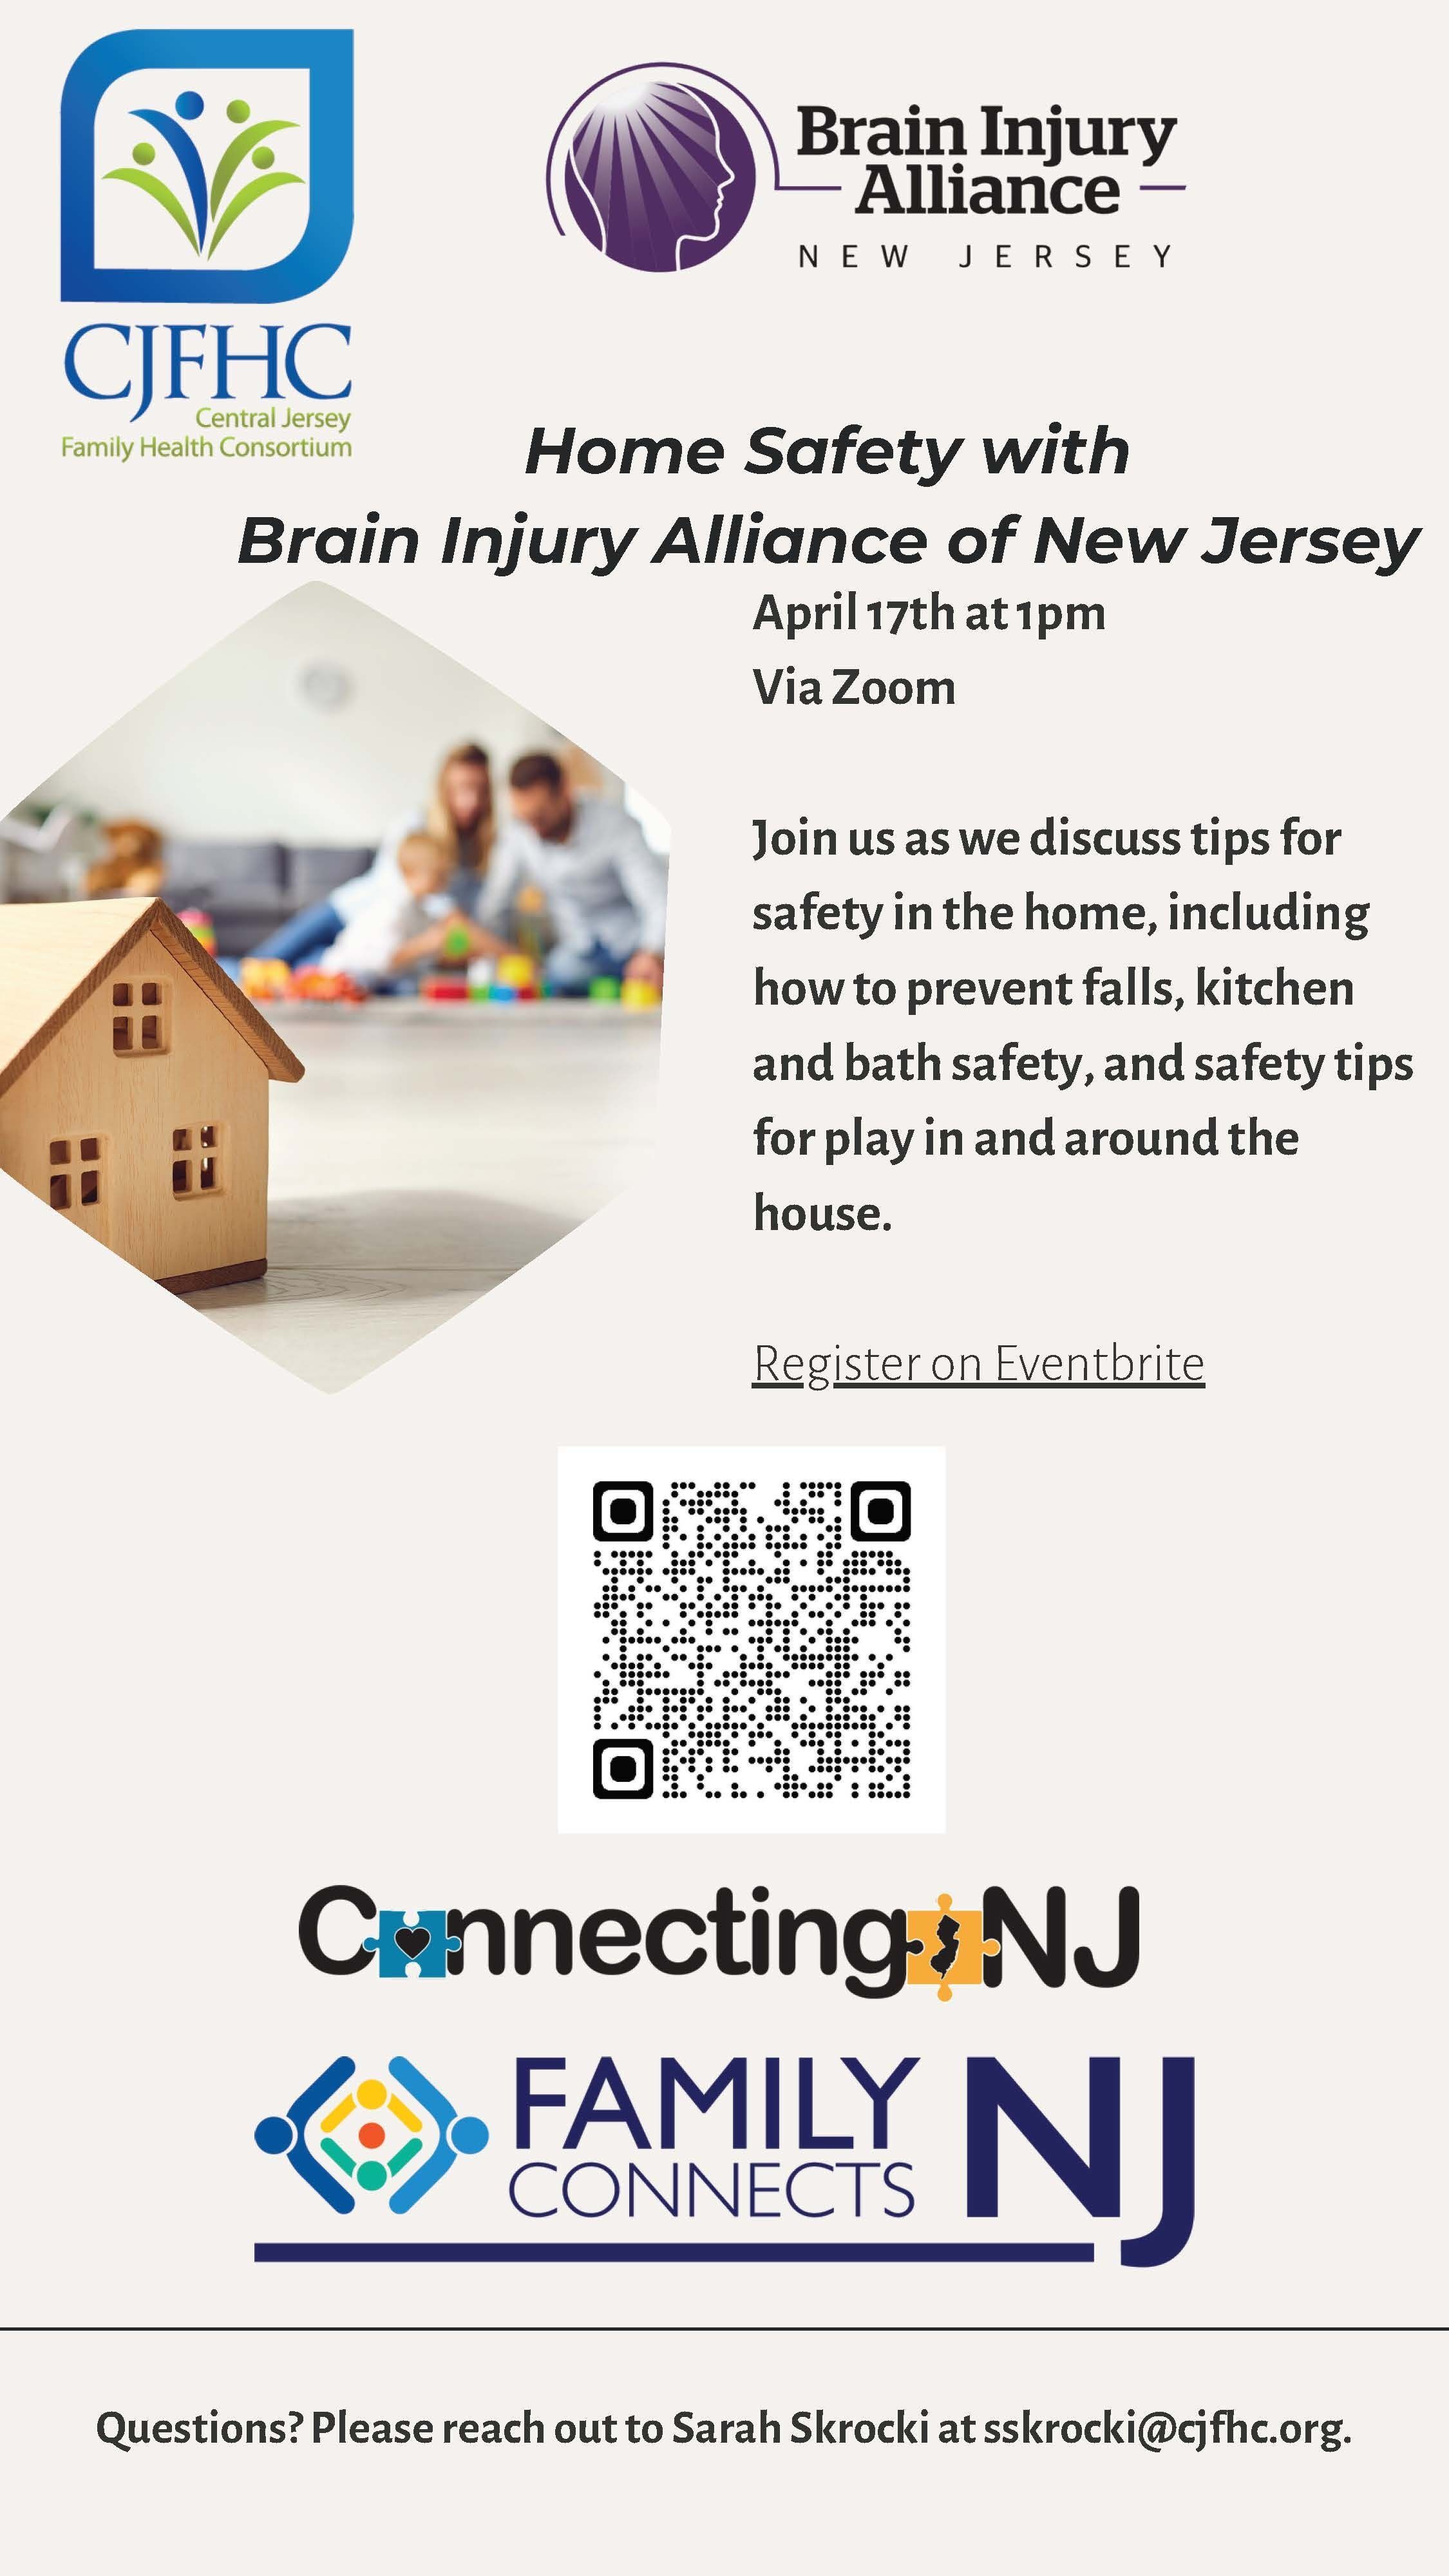 Home Safety with Connecting NJ and Brain Injury Alliance of NJ